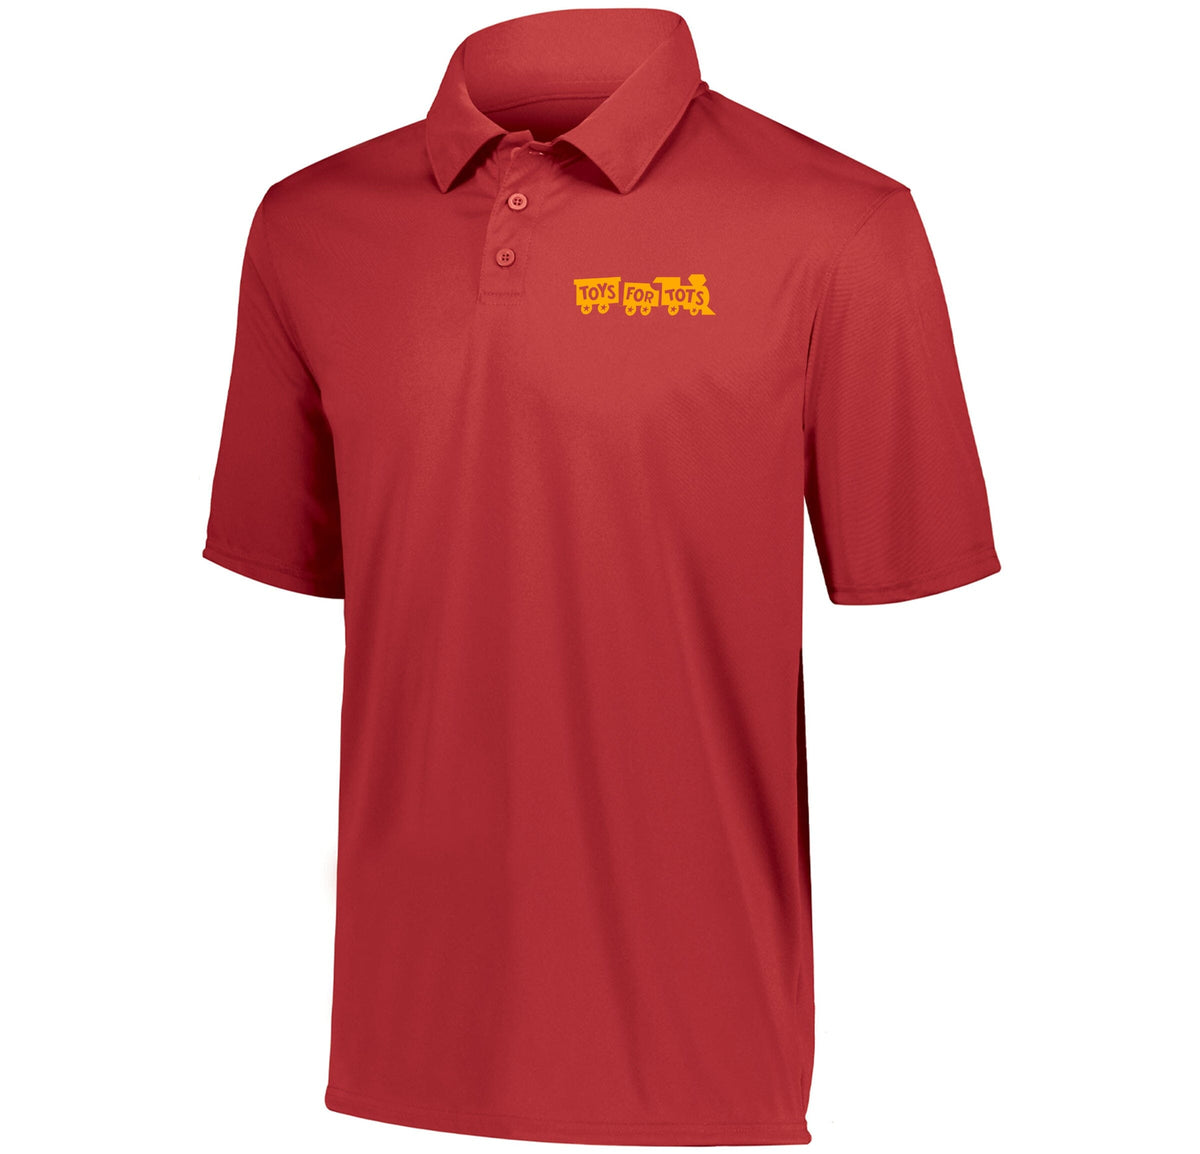 Gold TFT Chest Seal Screen-Printed Dri-Fit Performance Polo Polo Marine Corps Direct S RED 